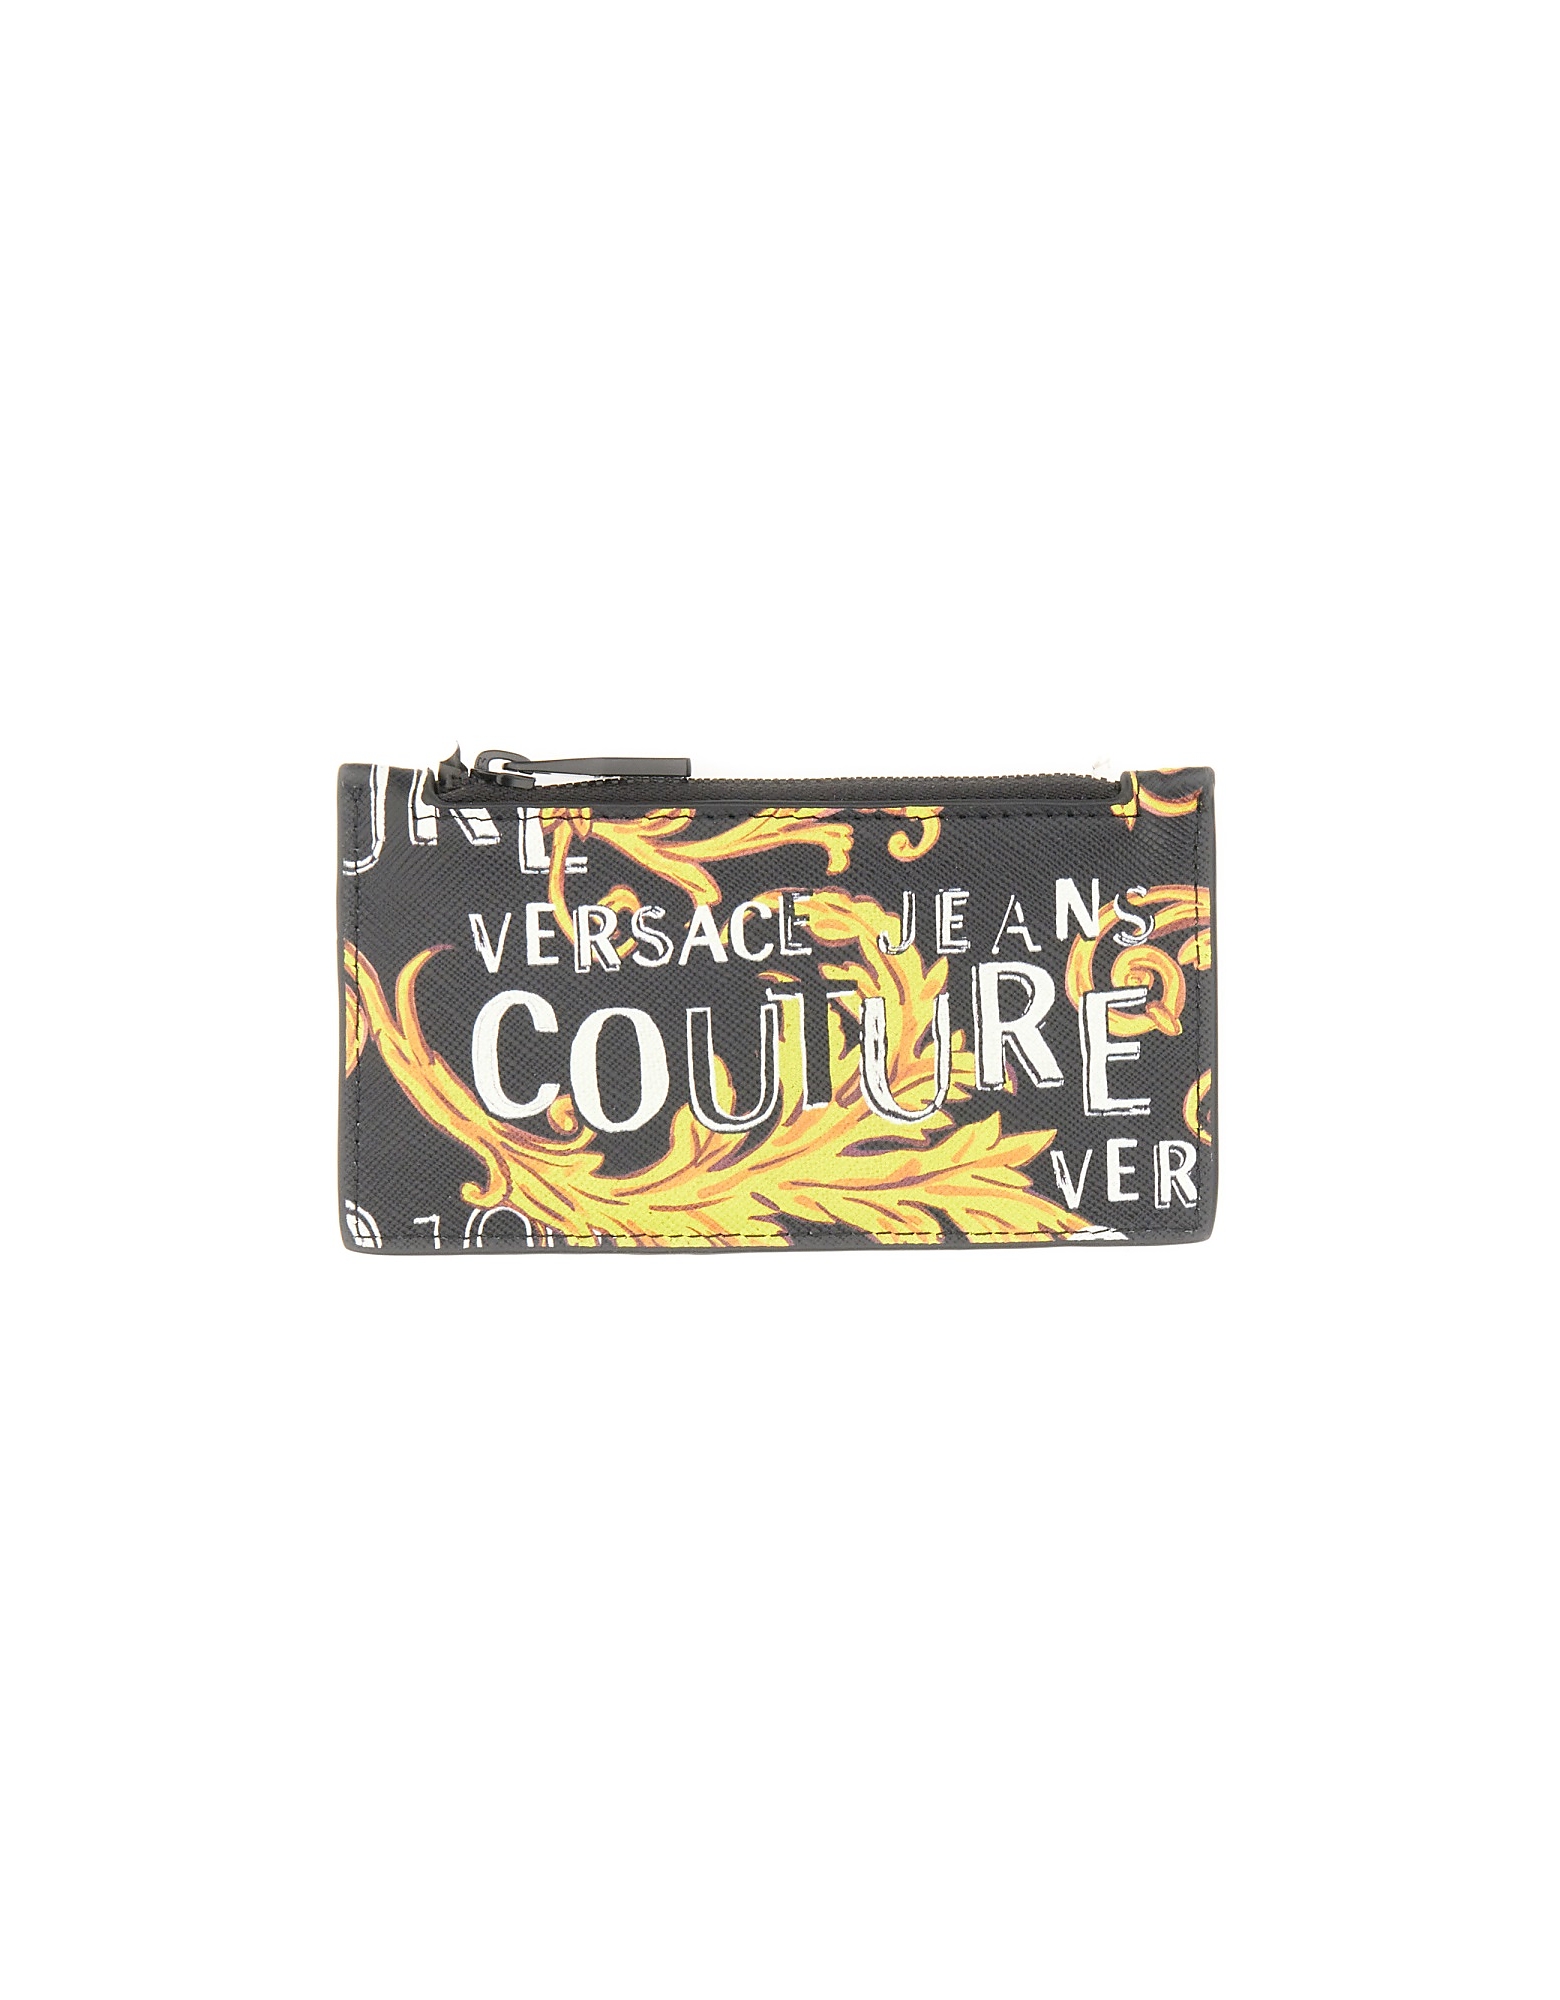 Versace Jeans Couture Sacs Homme Card Holder With Logo In Noir